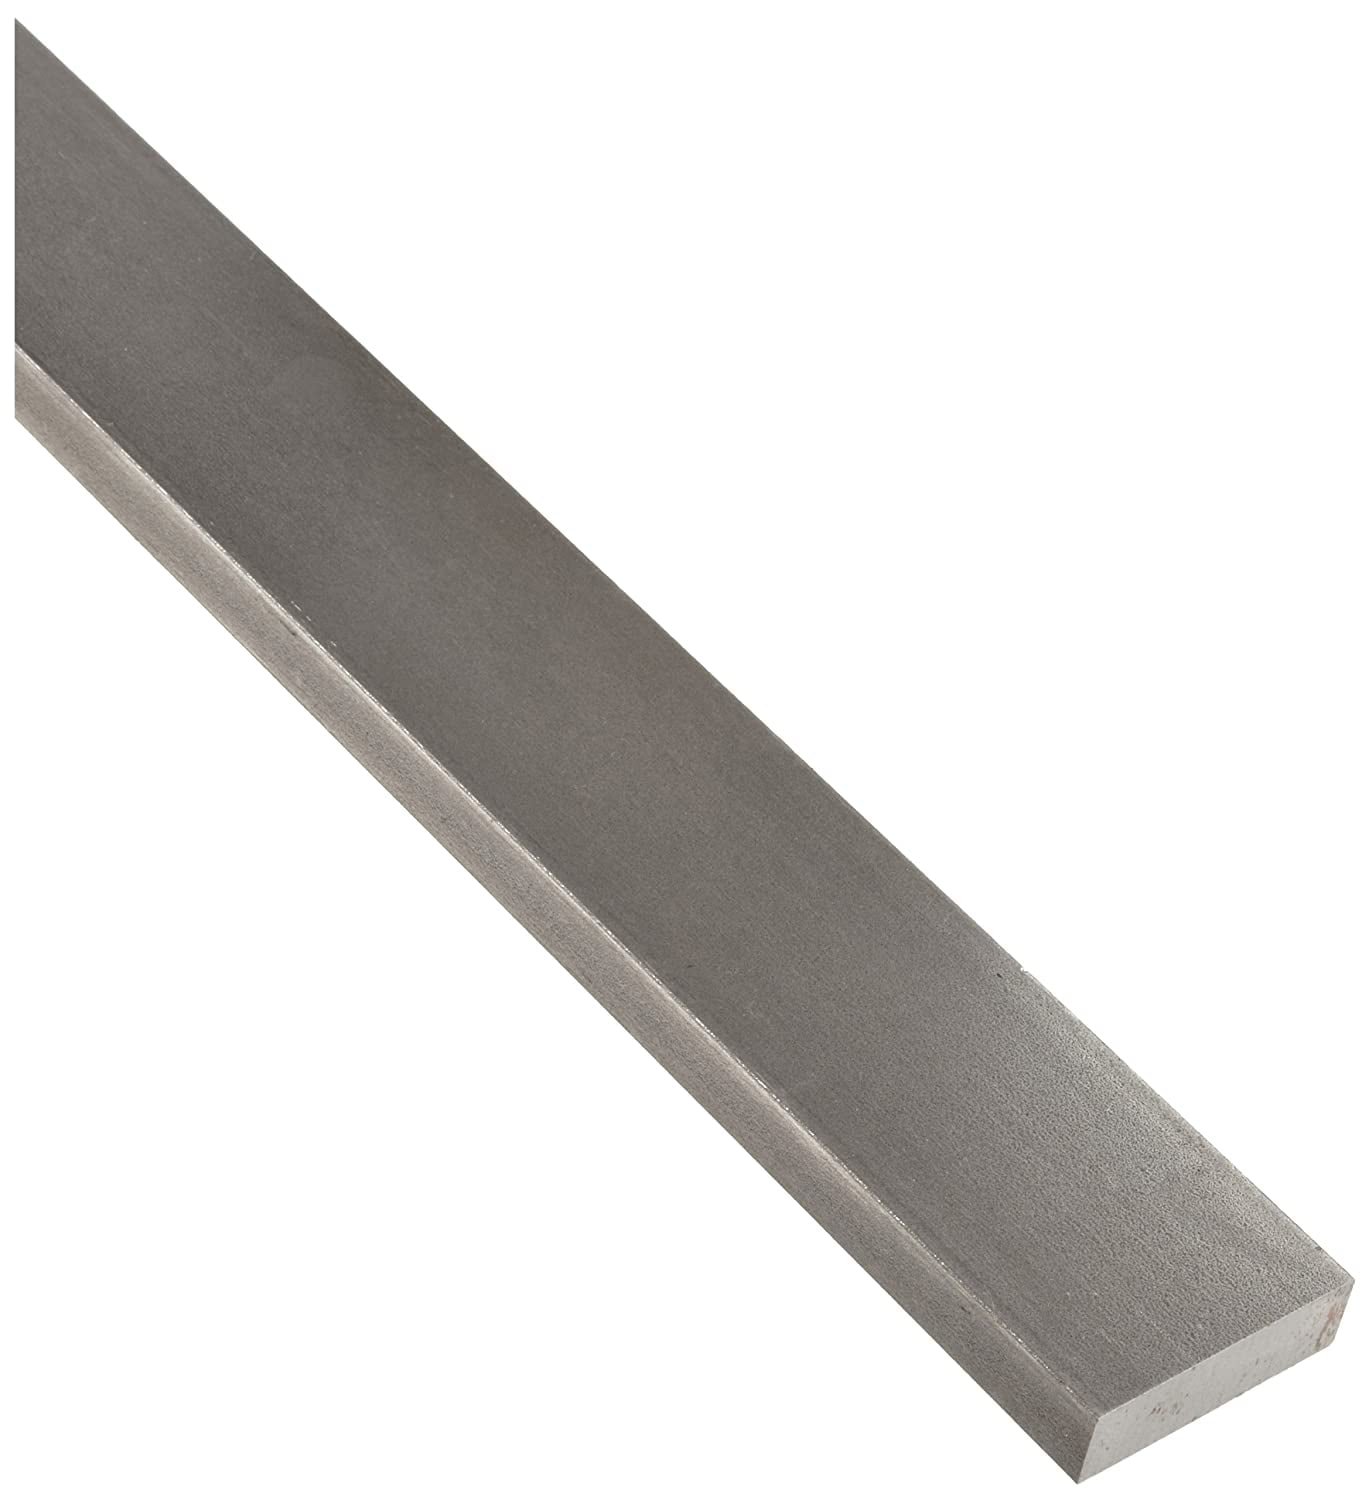 1018 Steel Flat Bar 1.25 x 4 x 34 Cold Finished